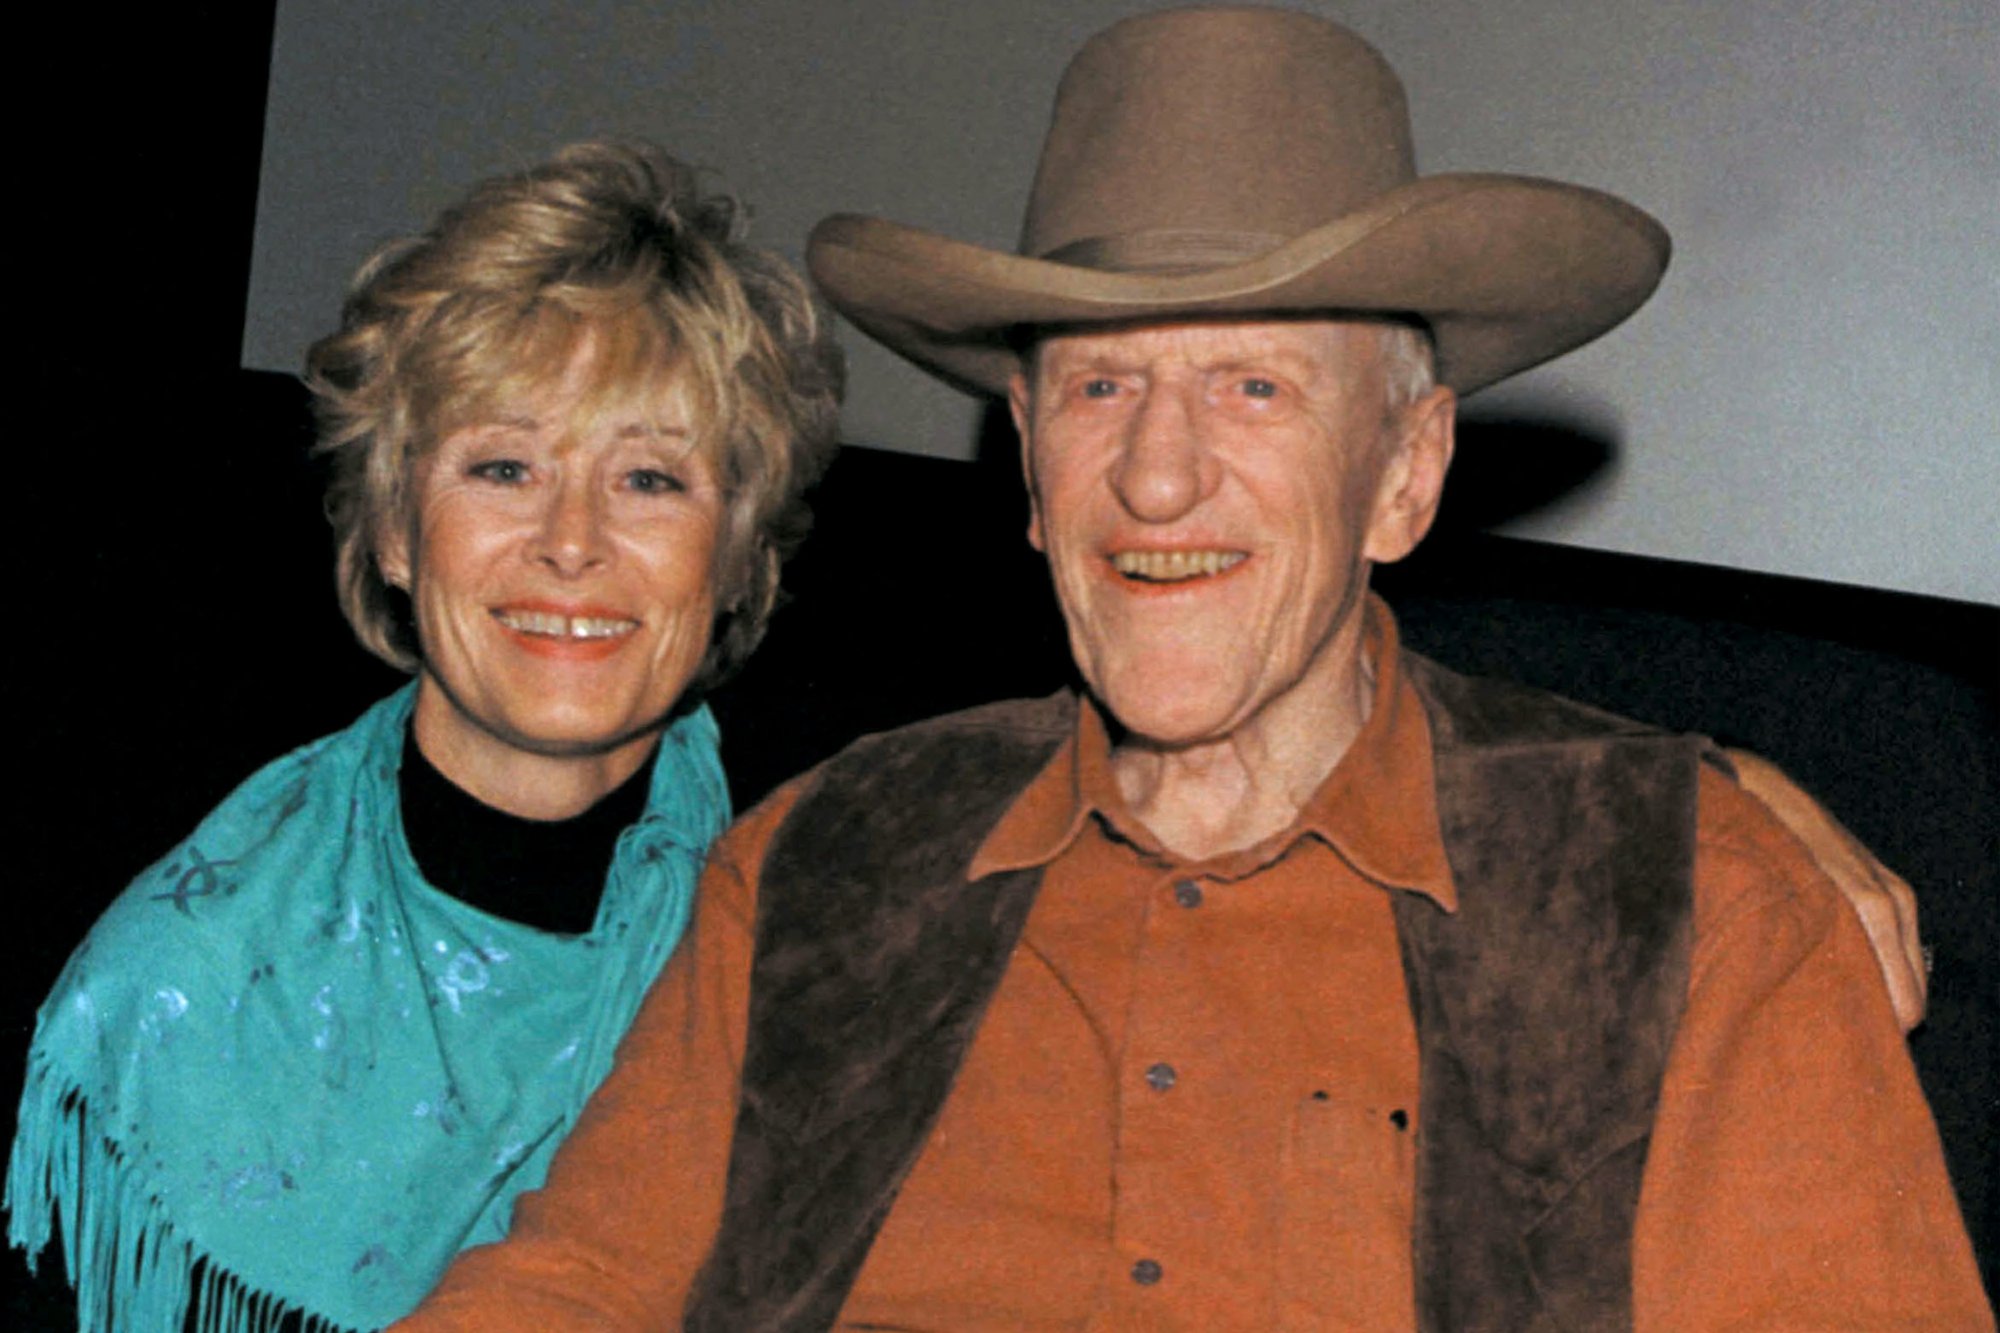 'Gunsmoke' actor James Arness and his wife, Janet, sitting next to each other. Arness is wearing a Western hat, vest, and collared shirt. Janet is wearing a blue scarf.